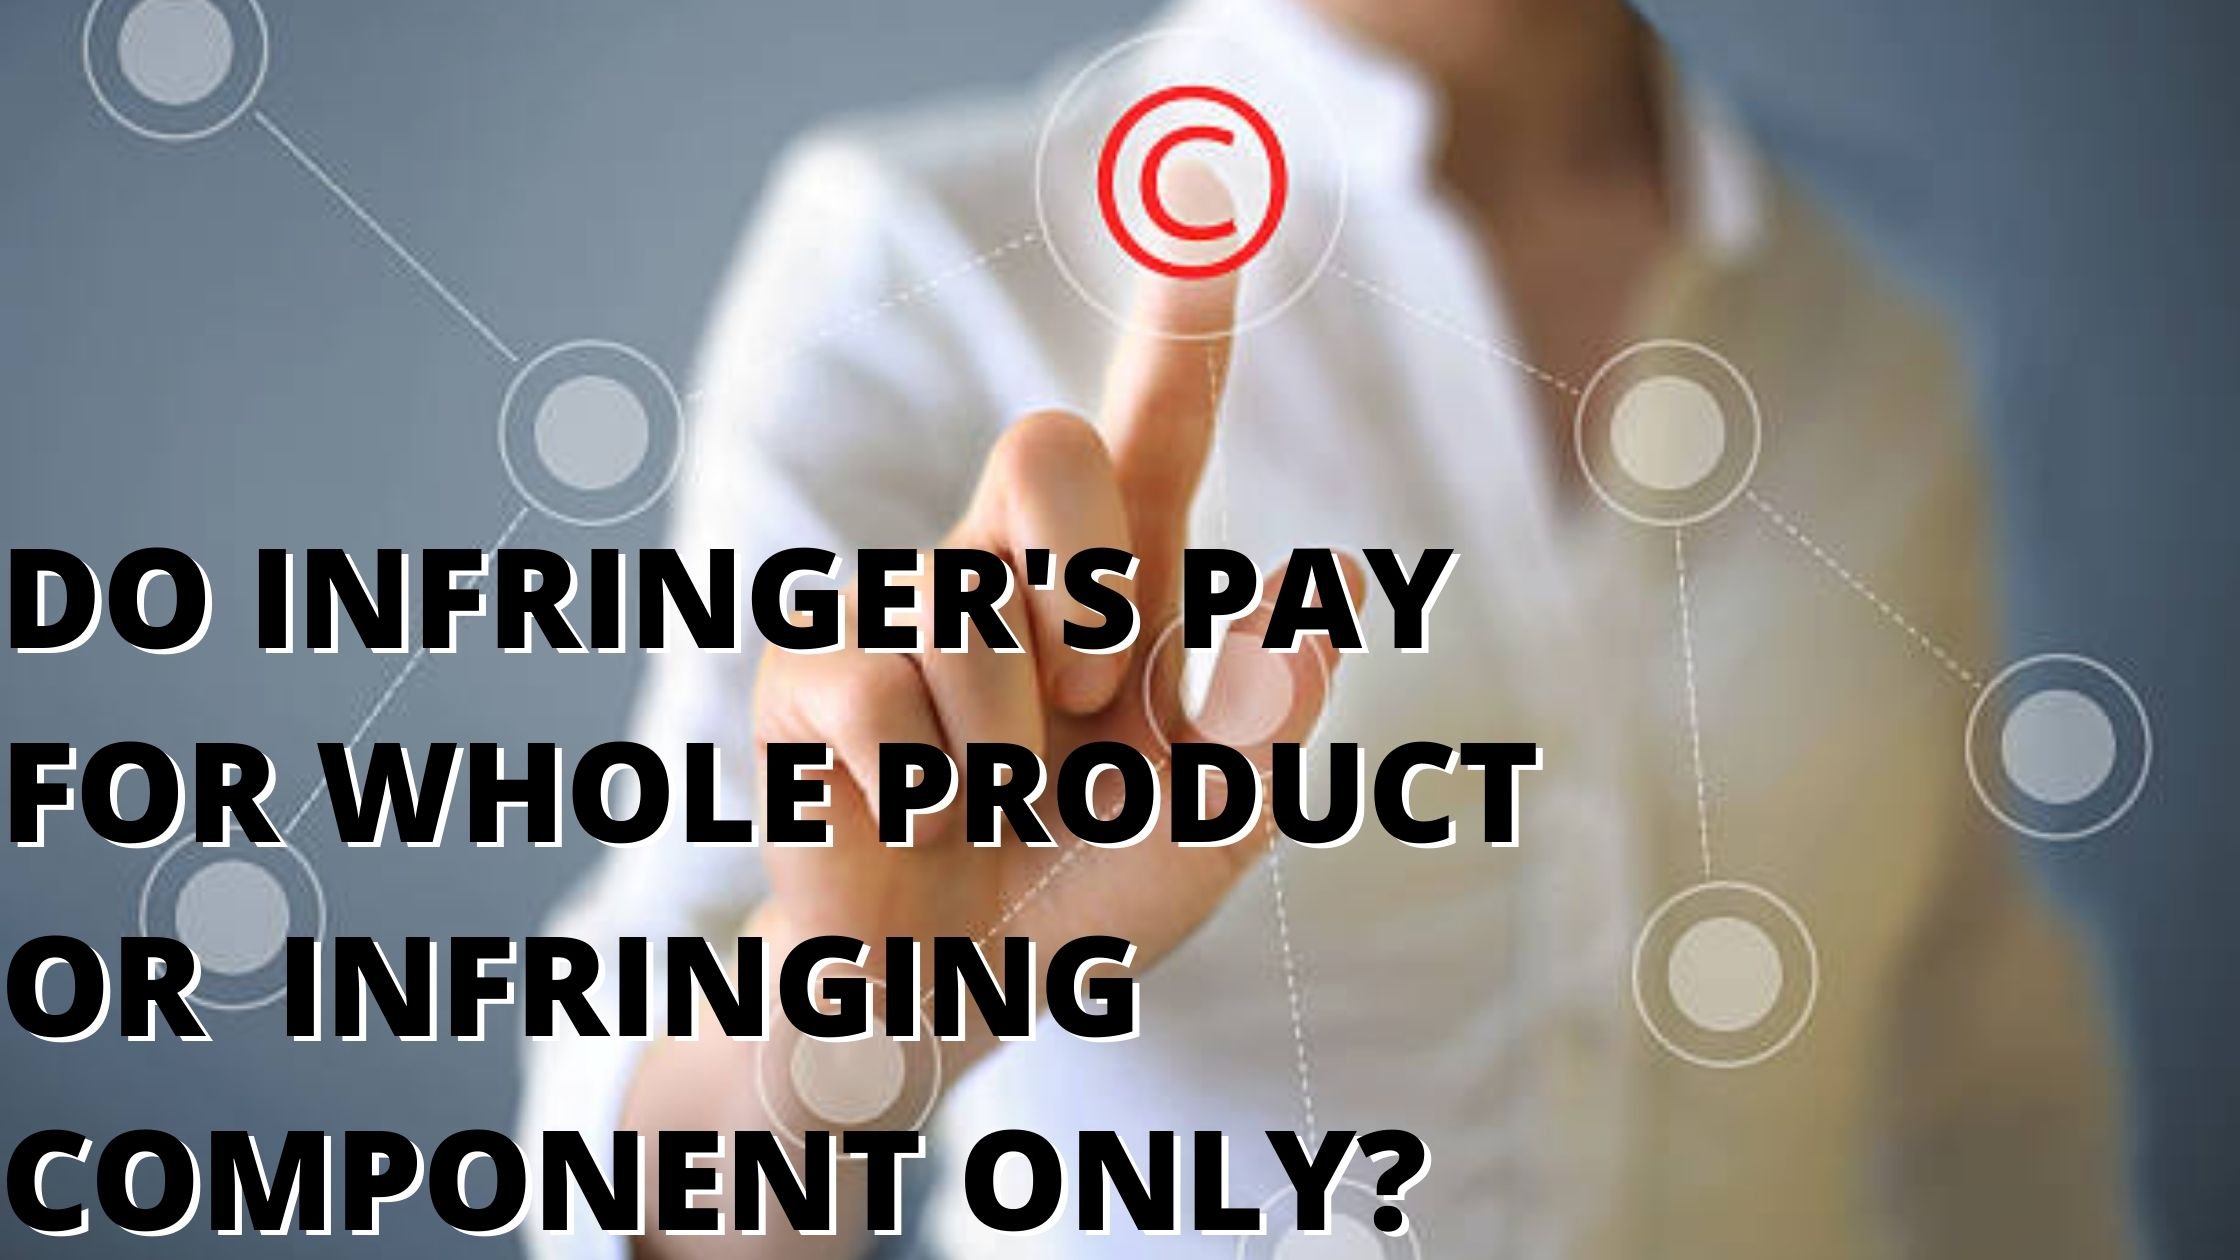 DO INFRINGERS PAY FOR THE WHOLE PRODUCT OR THE INFRINGING COMPONENT ONLY? 